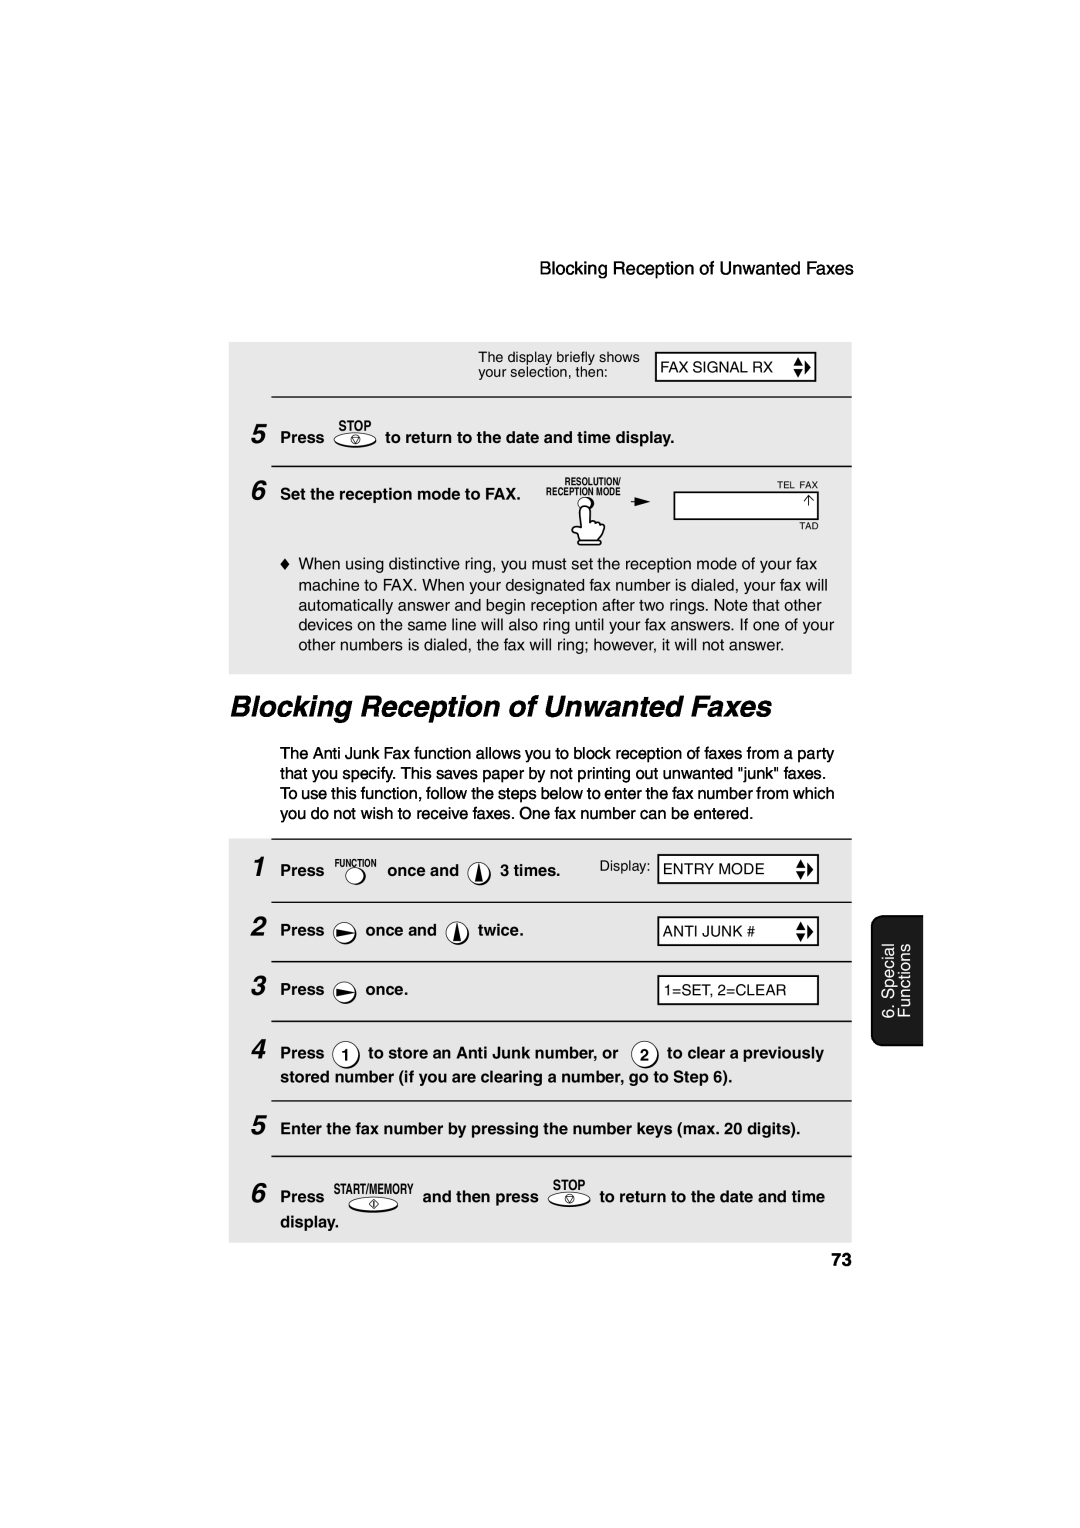 Sharp UX-A260 manual Blocking Reception of Unwanted Faxes, Special Functions 